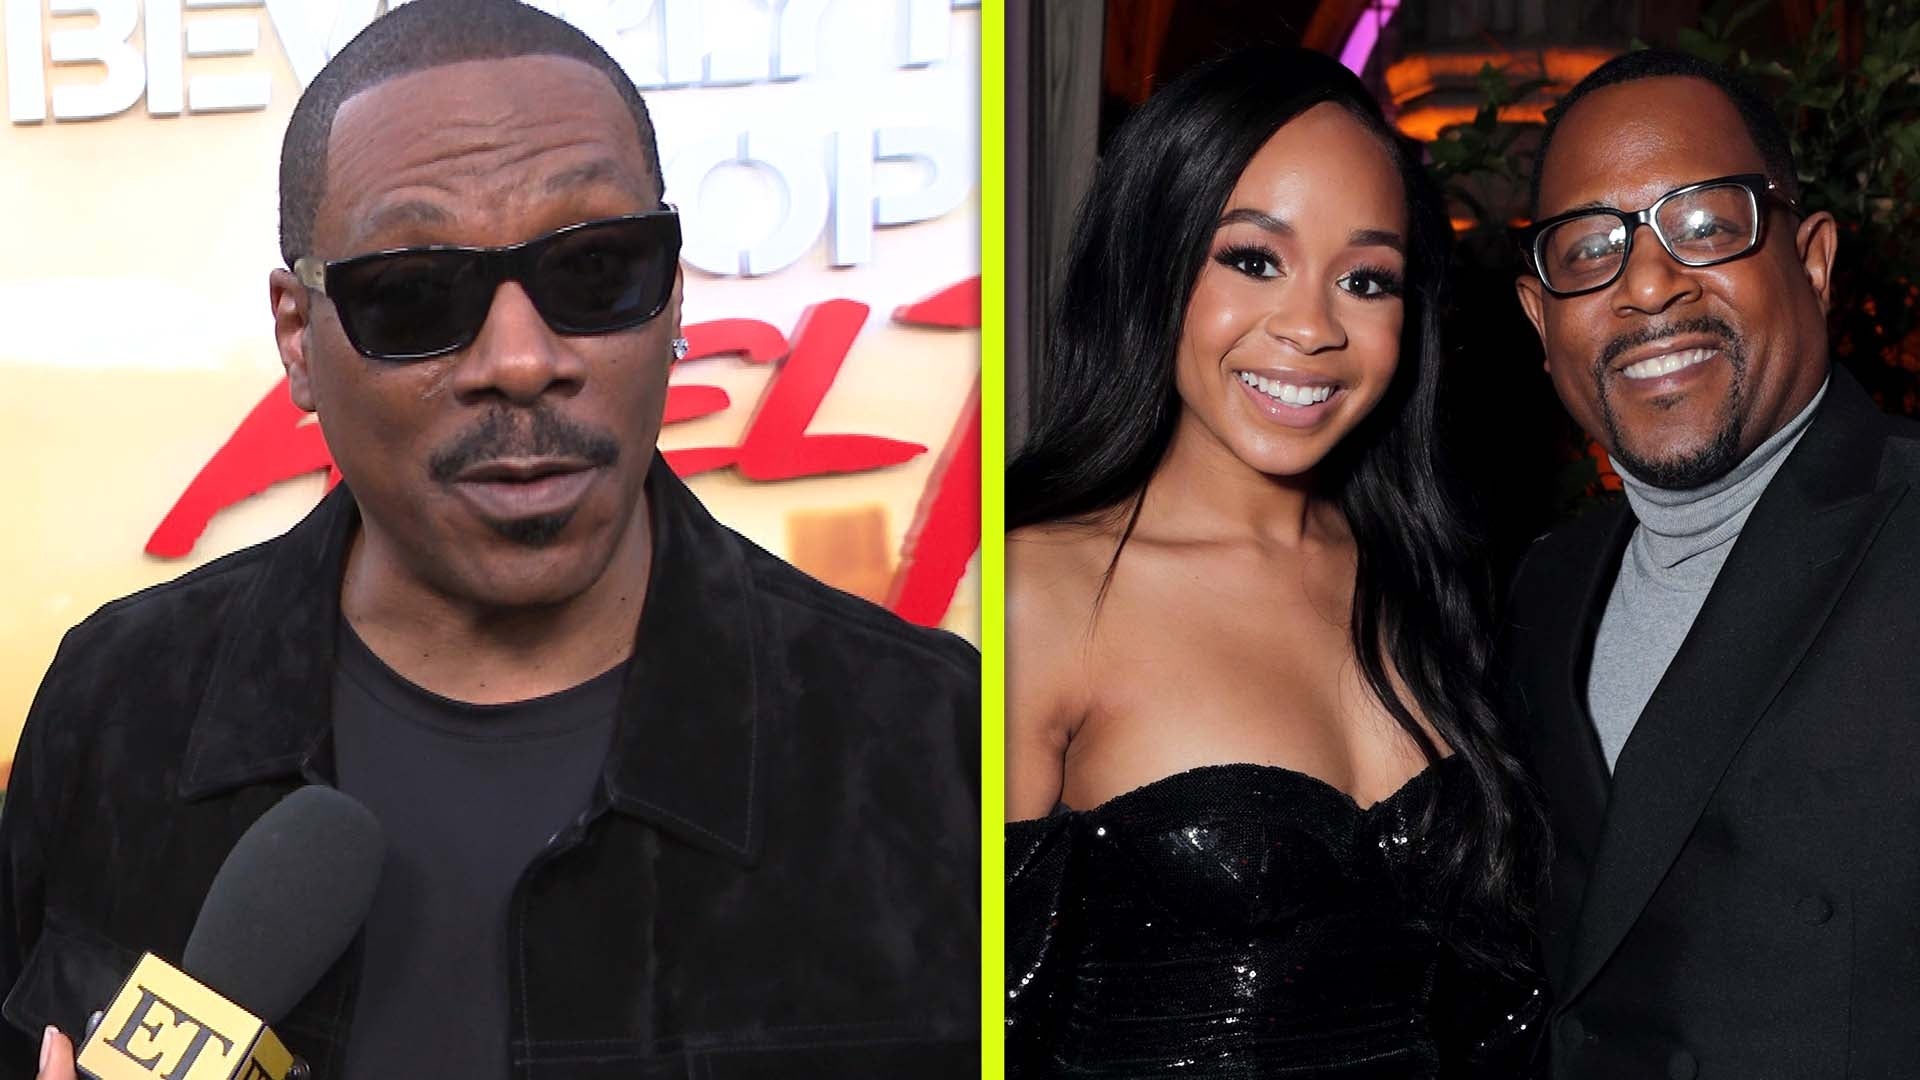 Eddie Murphy on Why He Thinks Martin Lawrence Should Pay for Their Kids' Wedding (Exclusive)